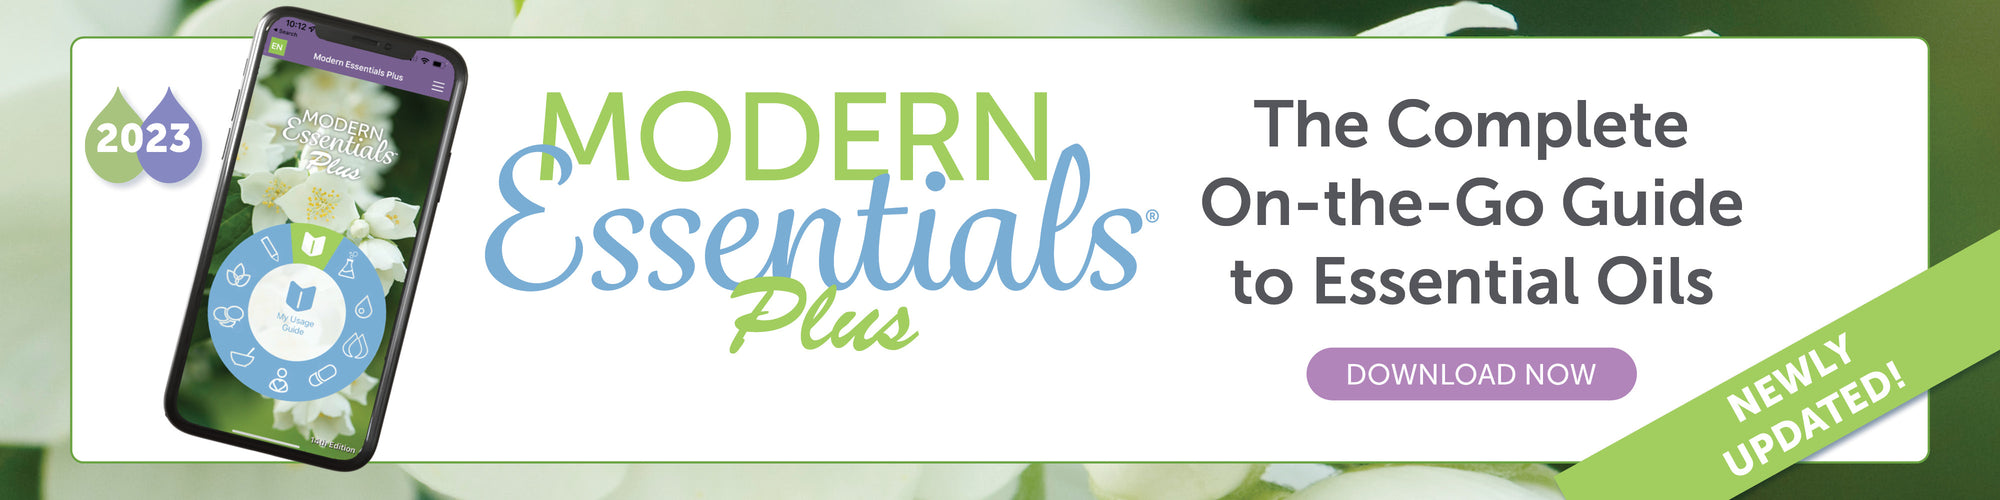 The Modern Essentials Plus app 15th edition update with the new 2023 doTERRA essential oils is now available.